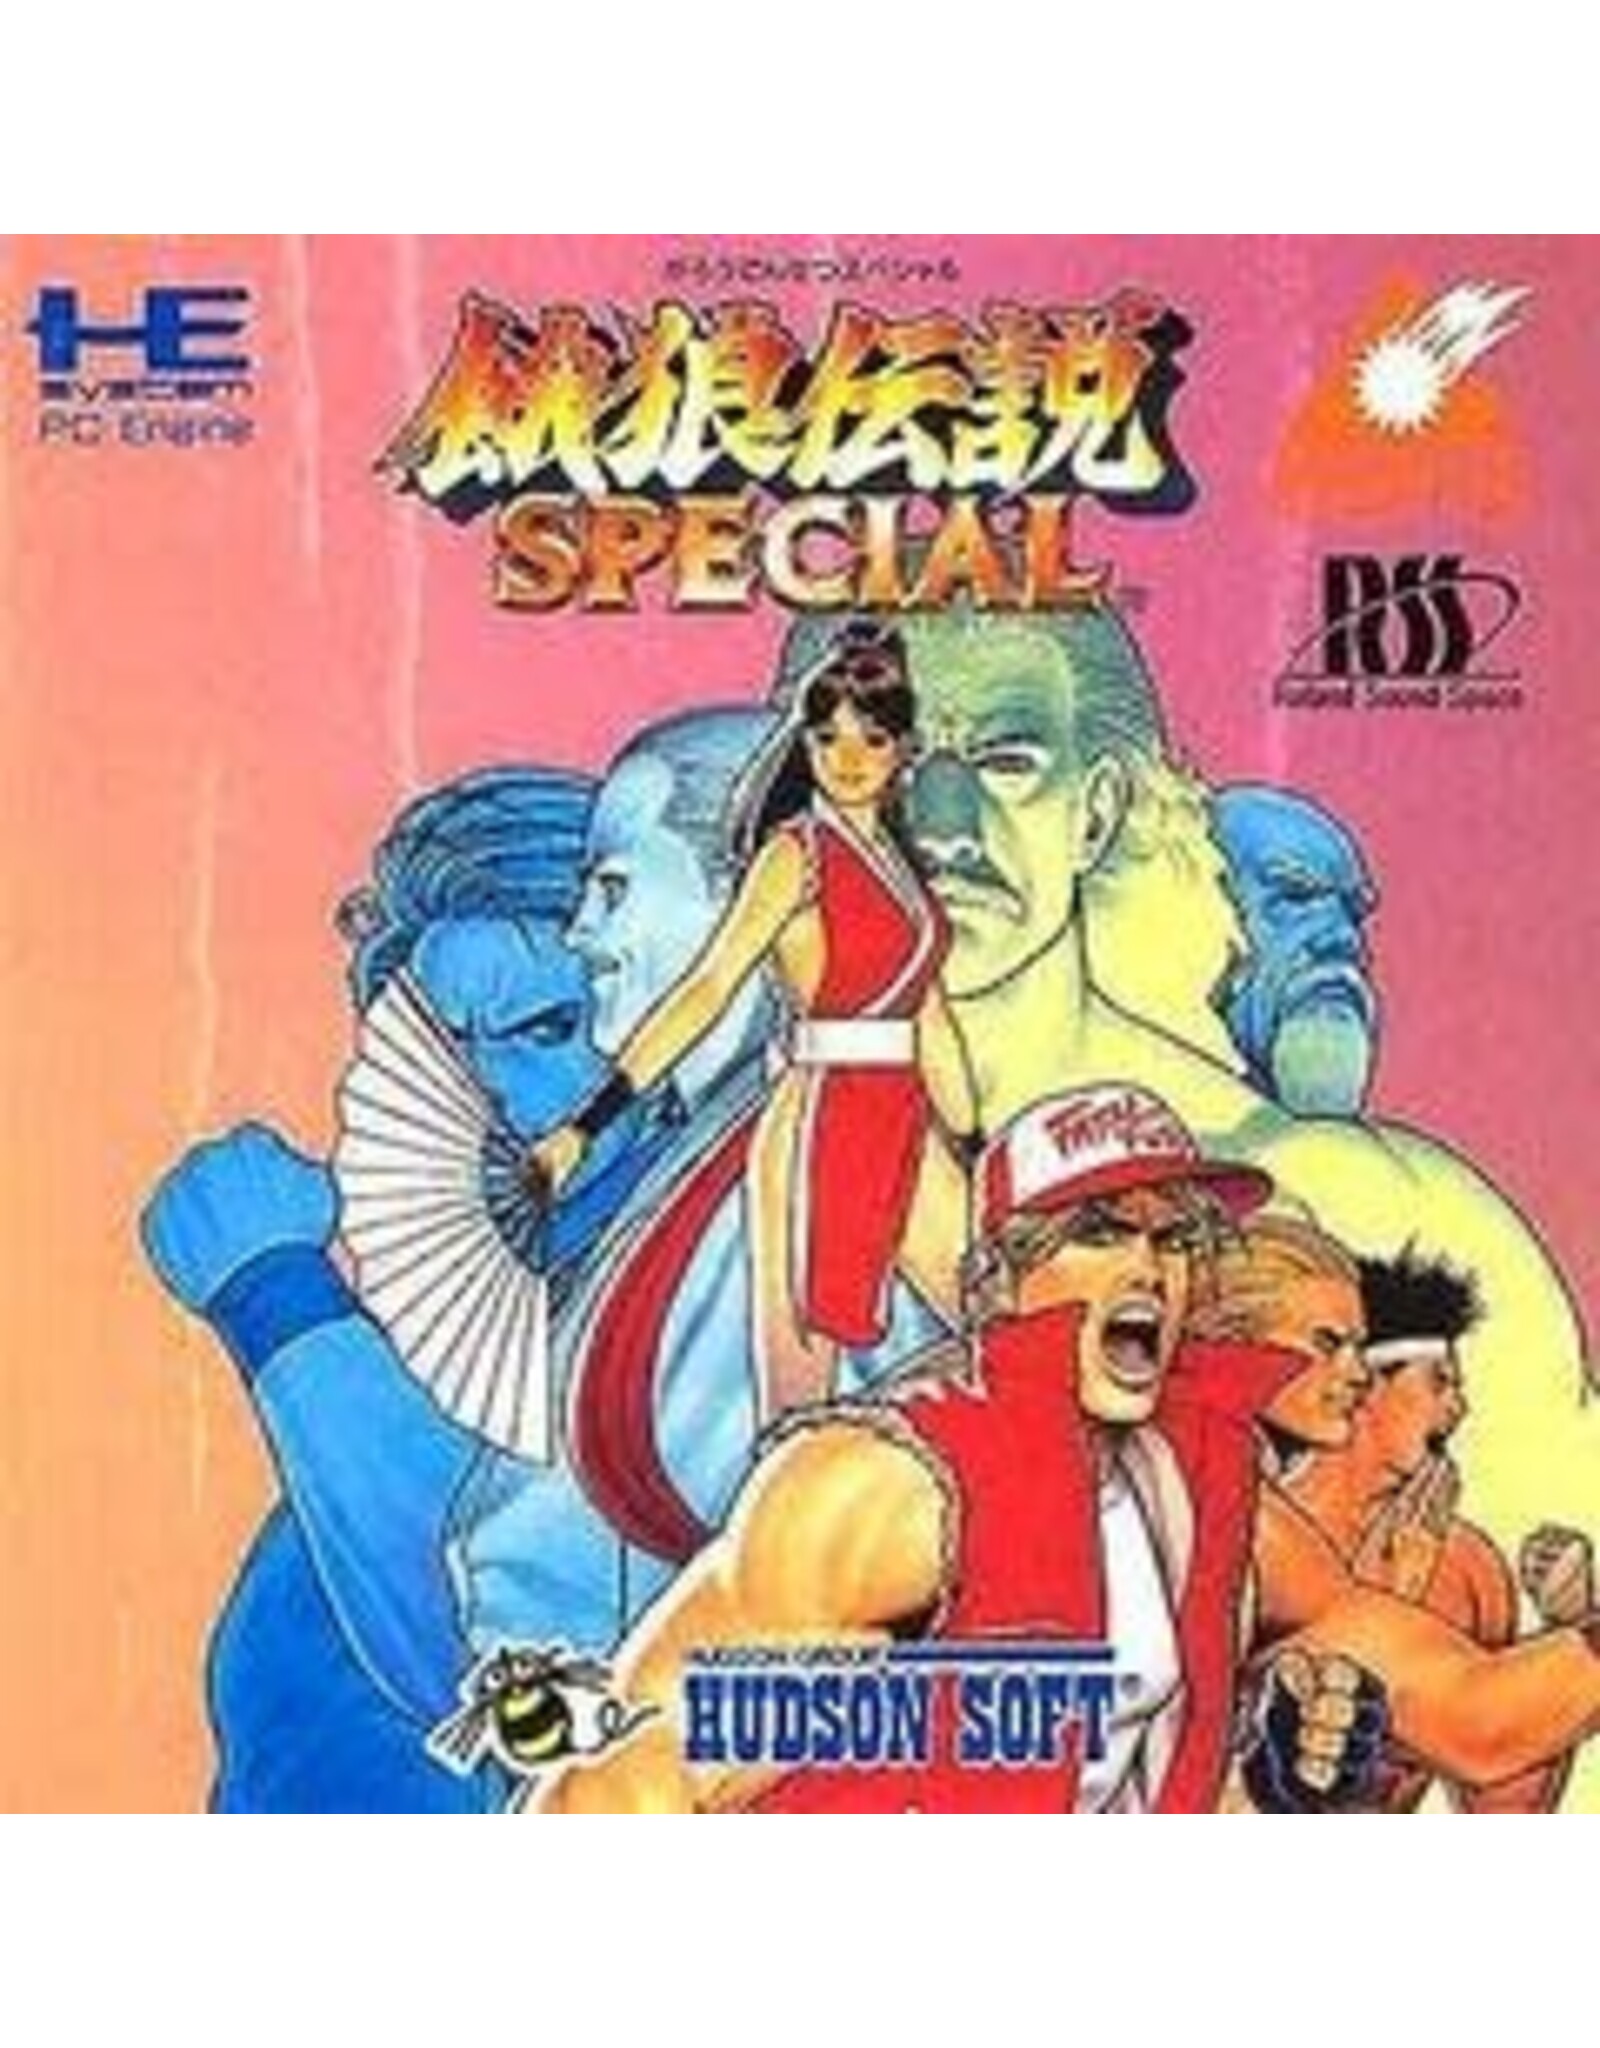 PC Engine Duo Fatal Fury Special - Arcade CD-ROM (Used)